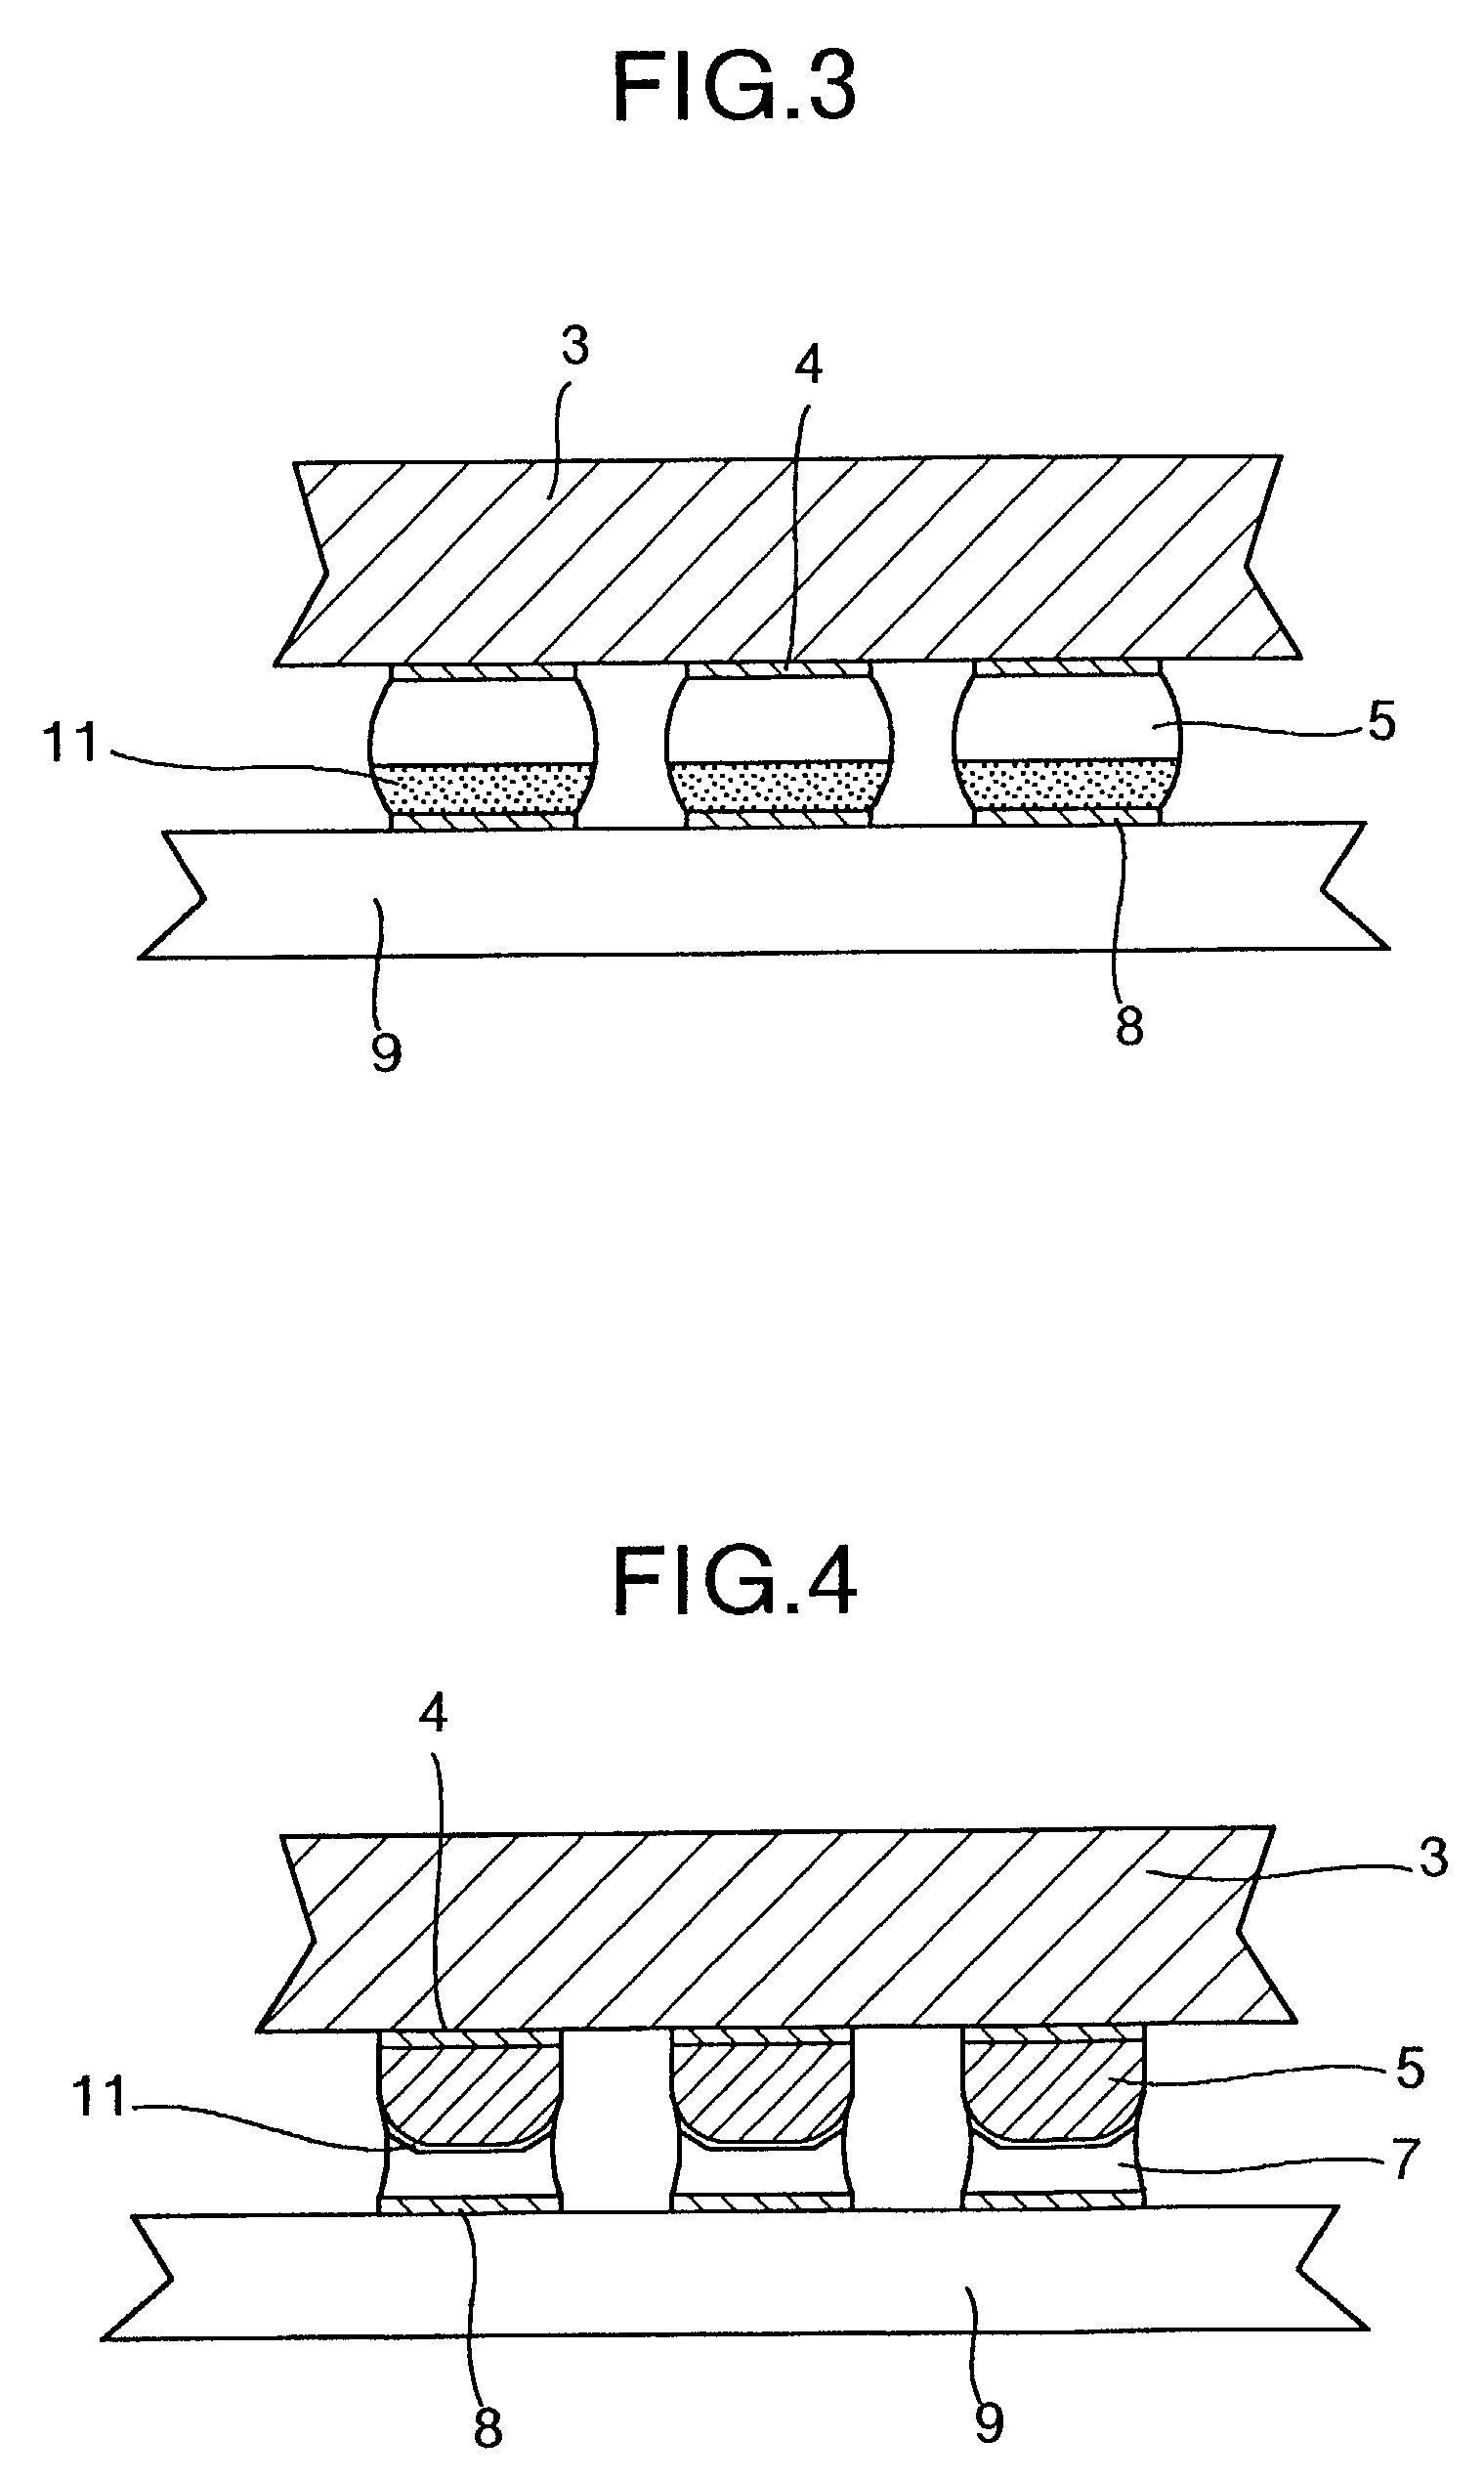 Semiconductor device having solder bumps reliably reflow solderable